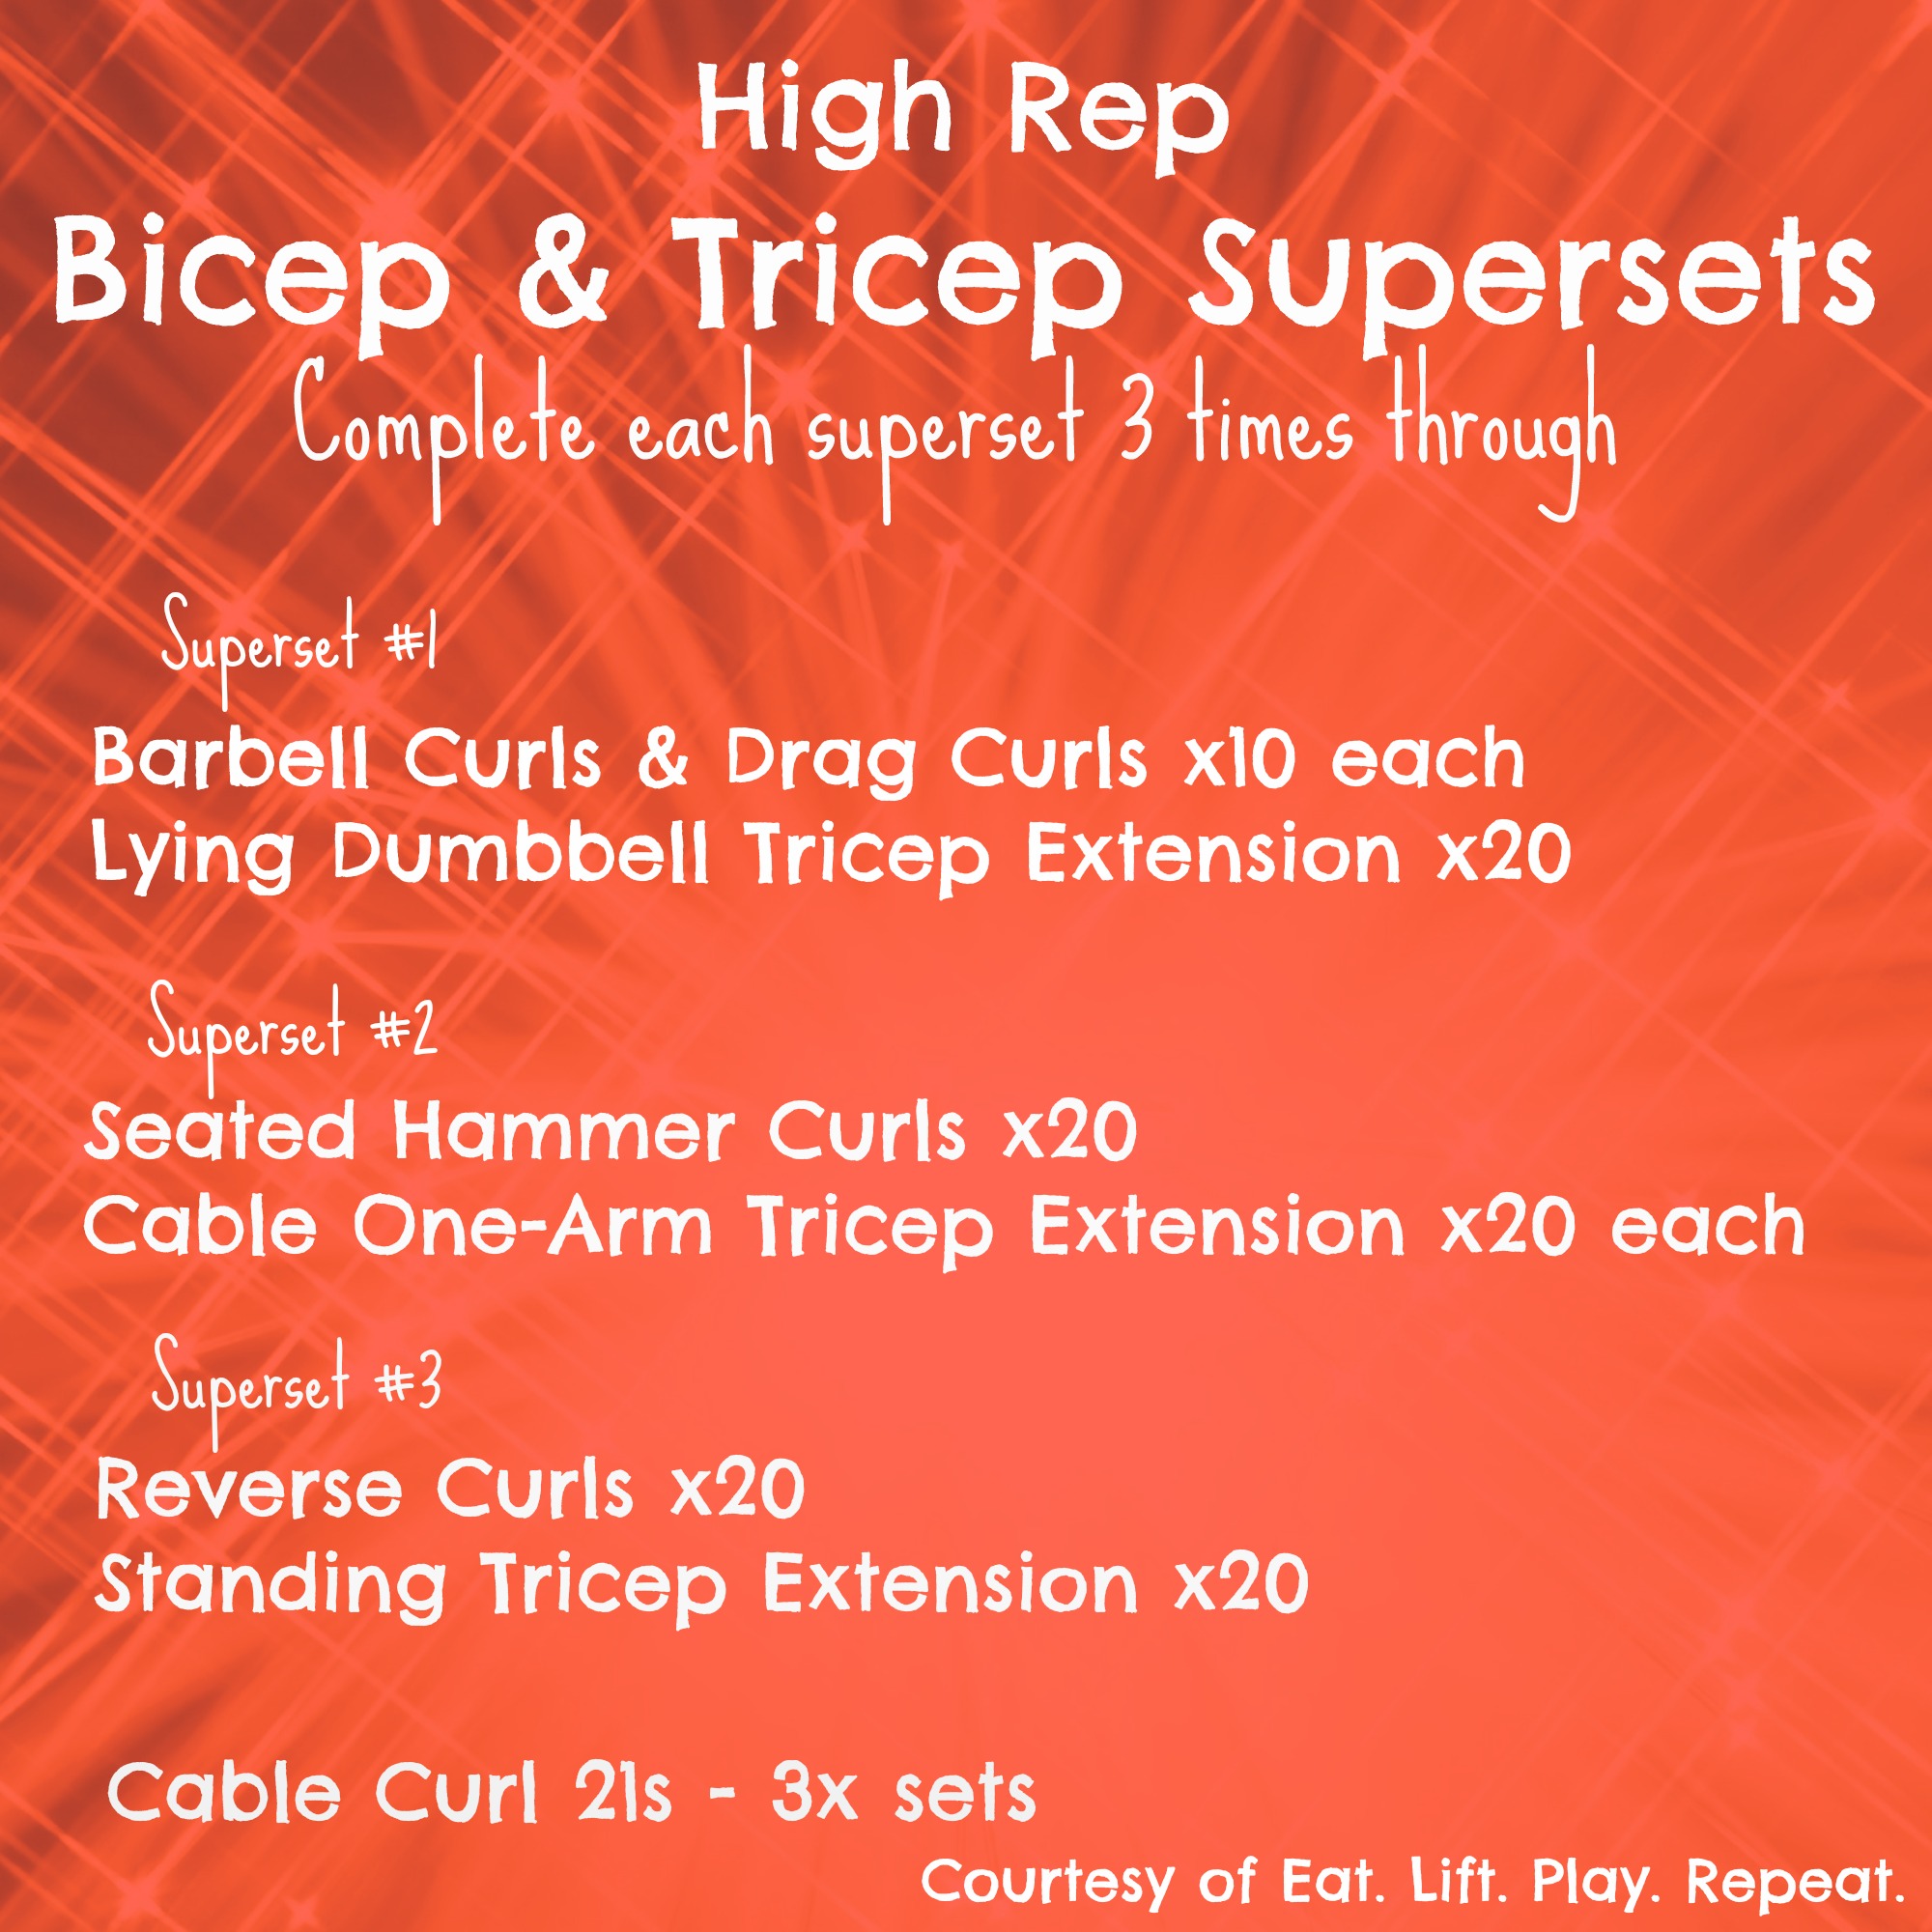 http://eatliftplayrepeat.com/wp-content/uploads/2015/12/High-Rep-Bicep-Tricep-Supersets.jpg